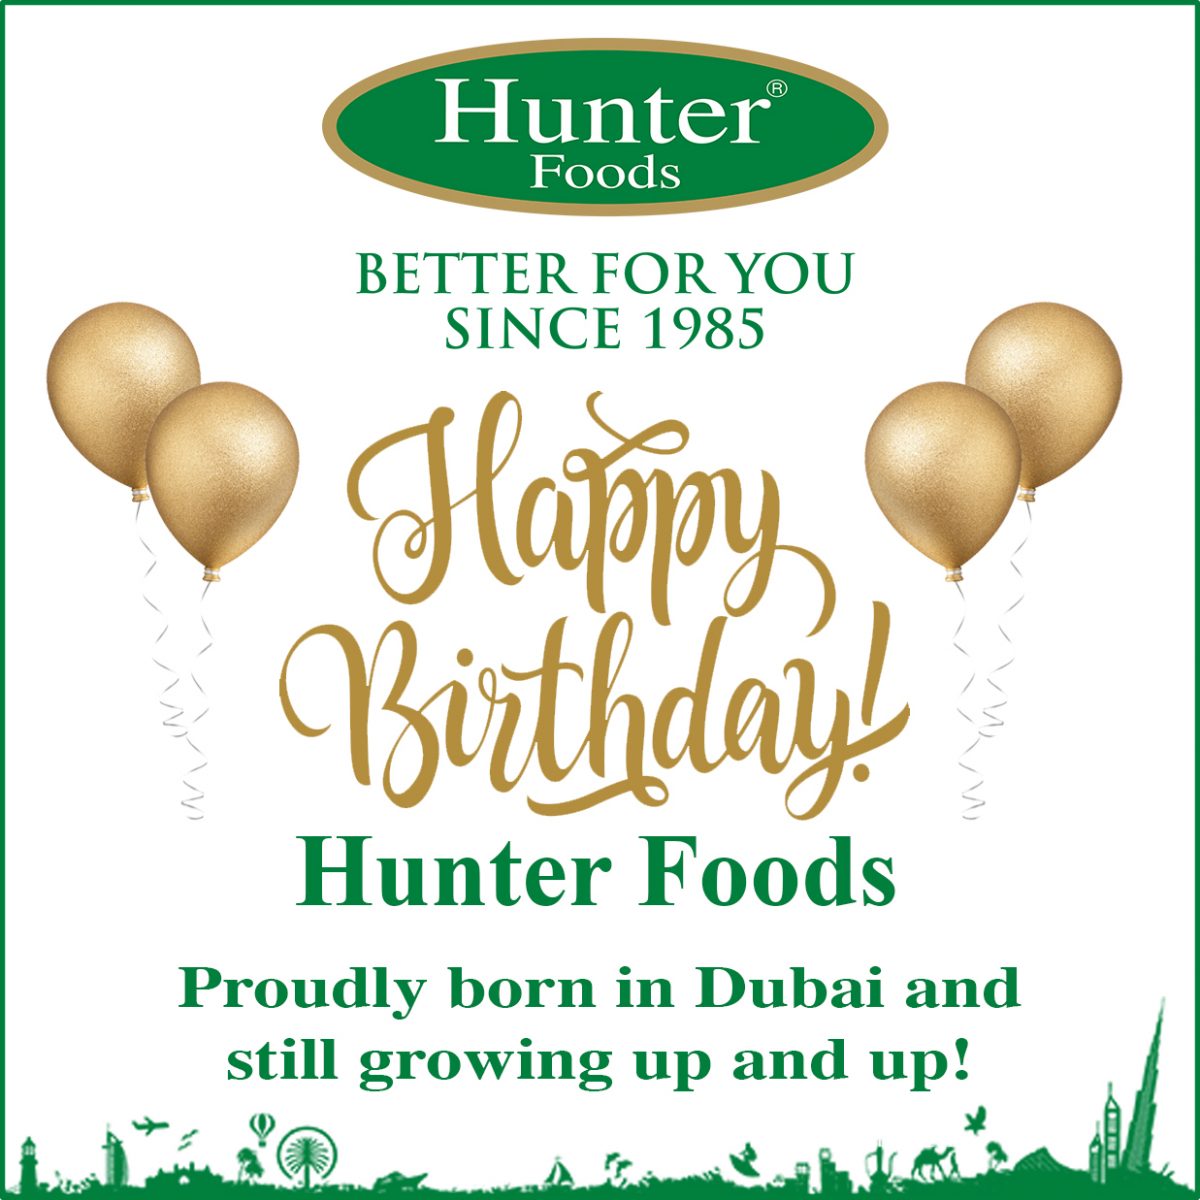 Happy Birthday, Hunter Foods! Proudly born in Dubai and still growing up and up!